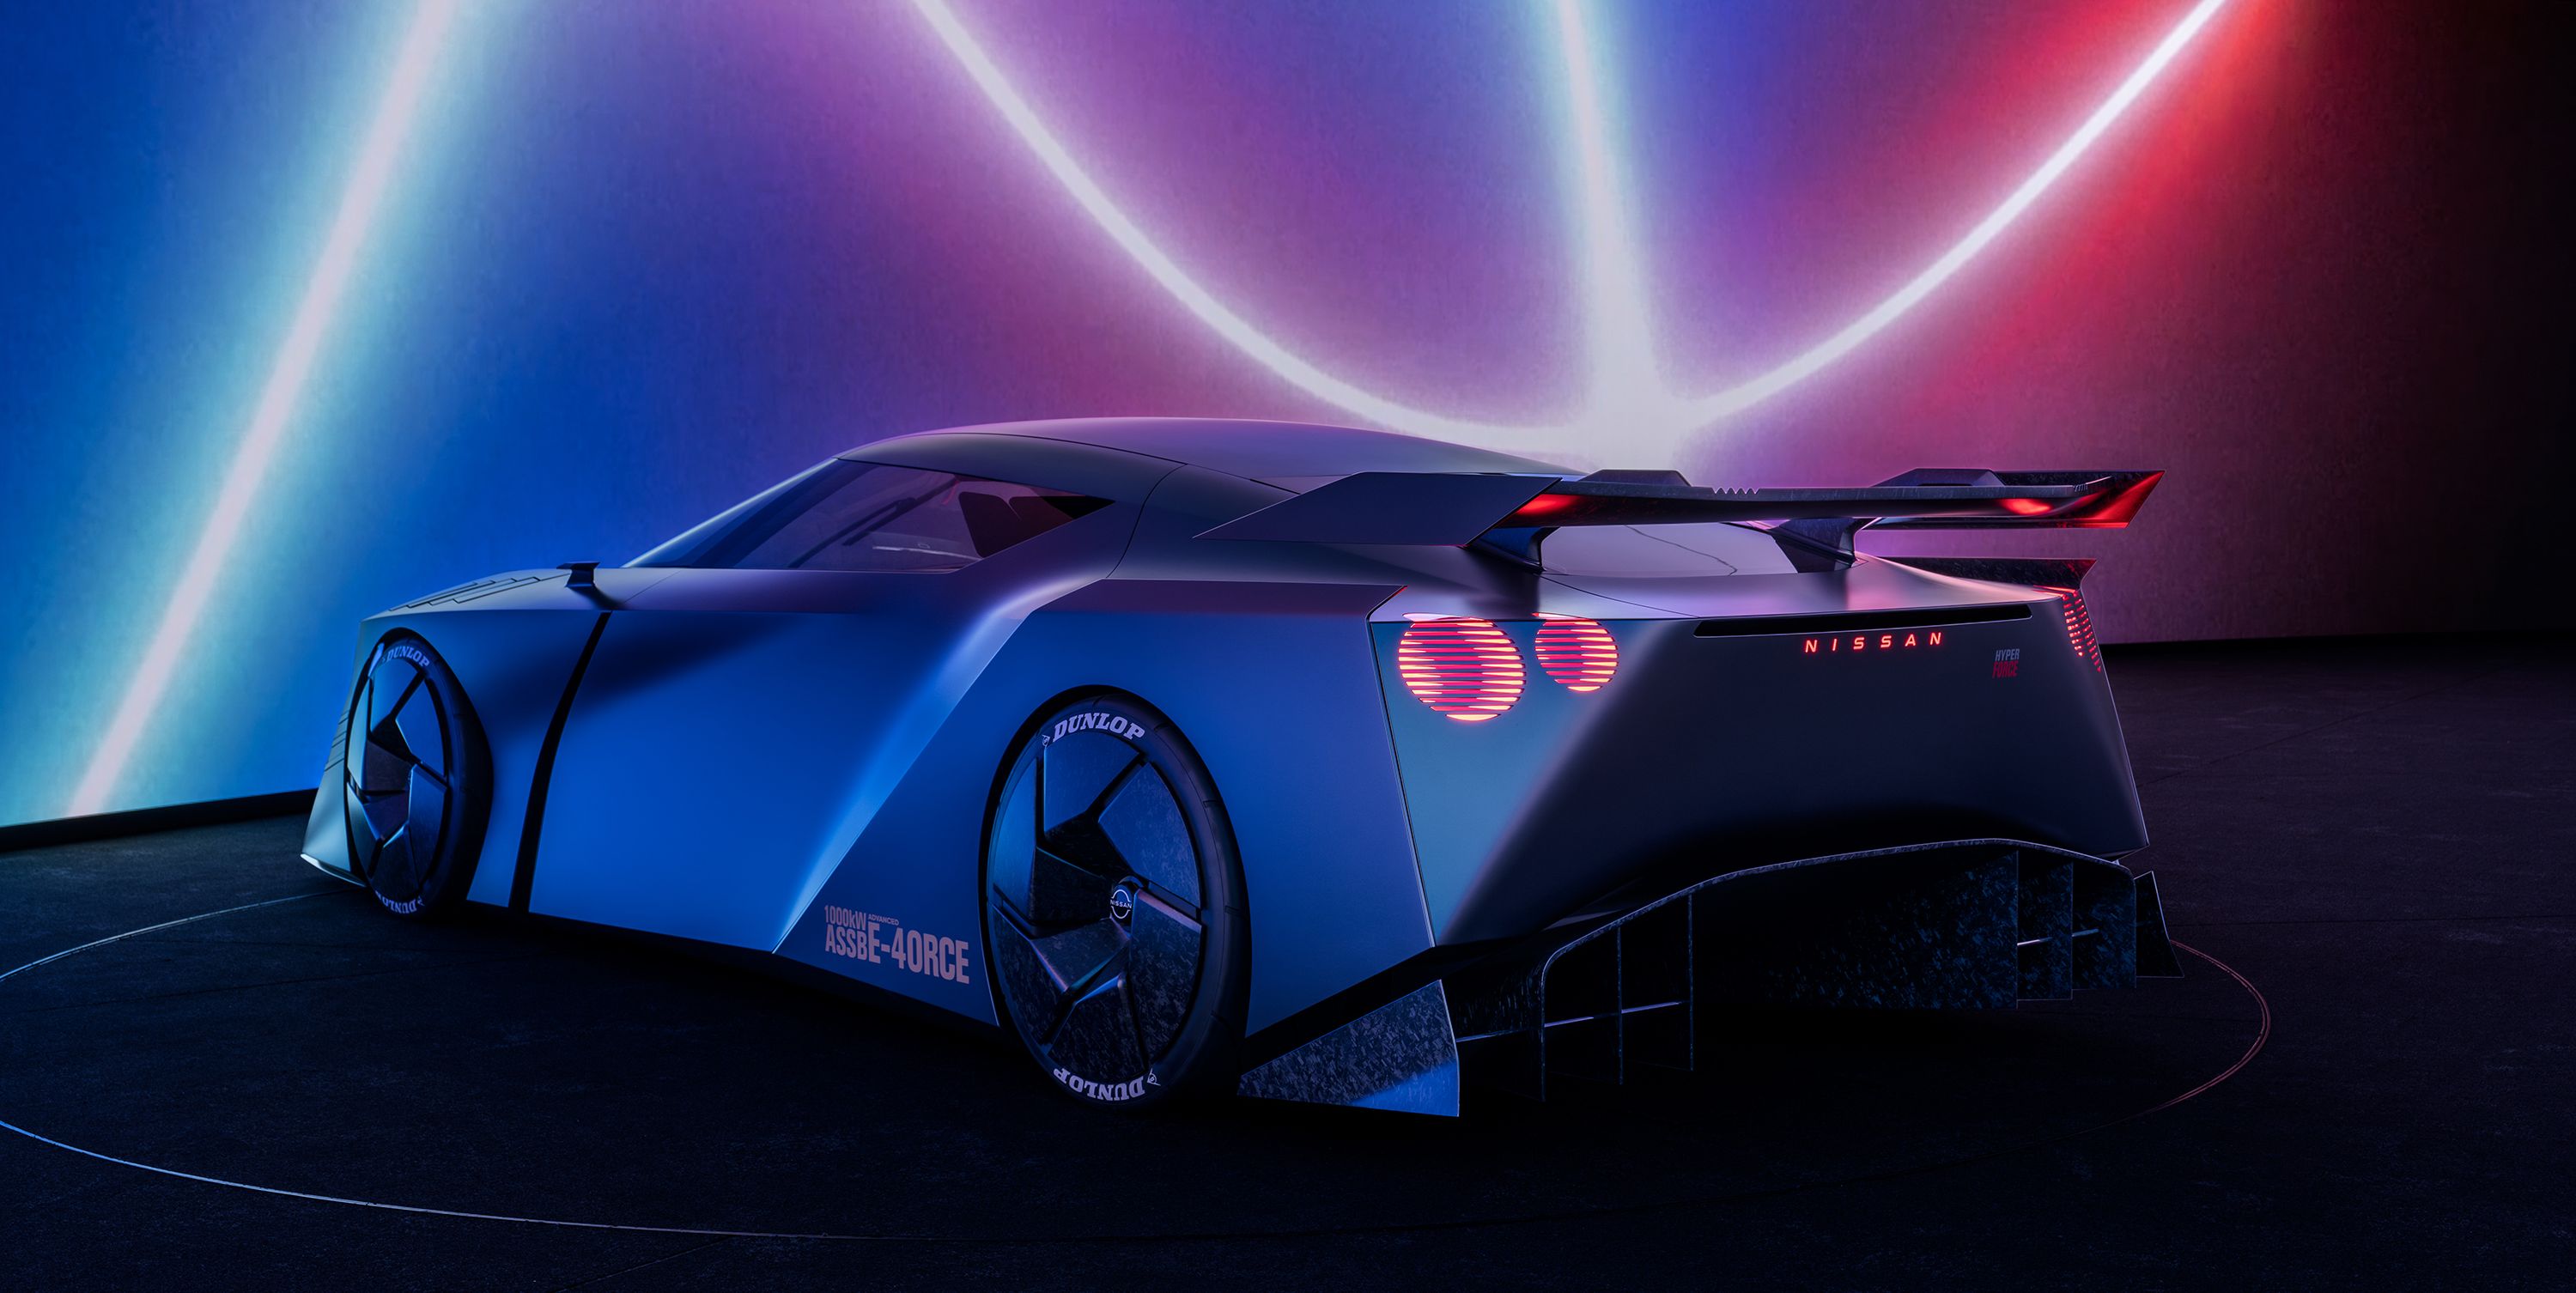 The 1341-HP Nissan Hyper Force Sure Looks Like an Electric GT-R